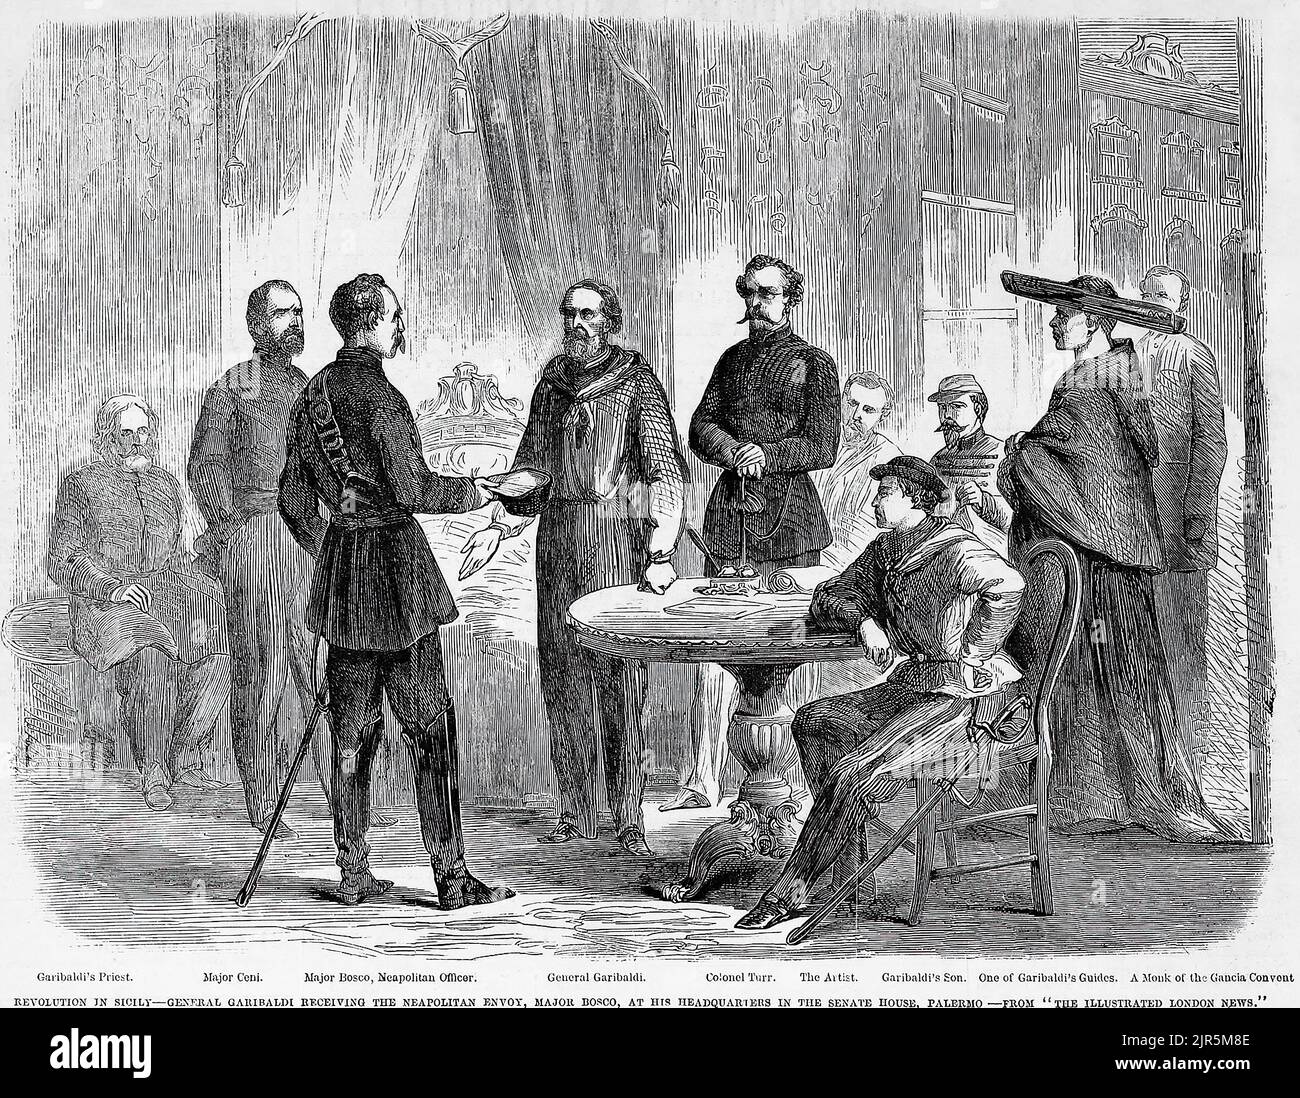 Revolution in Italy - General Giuseppe Garibaldi receiving the Neapolitan envoy, Major Bosco, at his headquarters in the Senate House, Palermo (1860). Expedition of the Thousand. 19th century illustration from Frank Leslie's Illustrated Newspaper Stock Photo